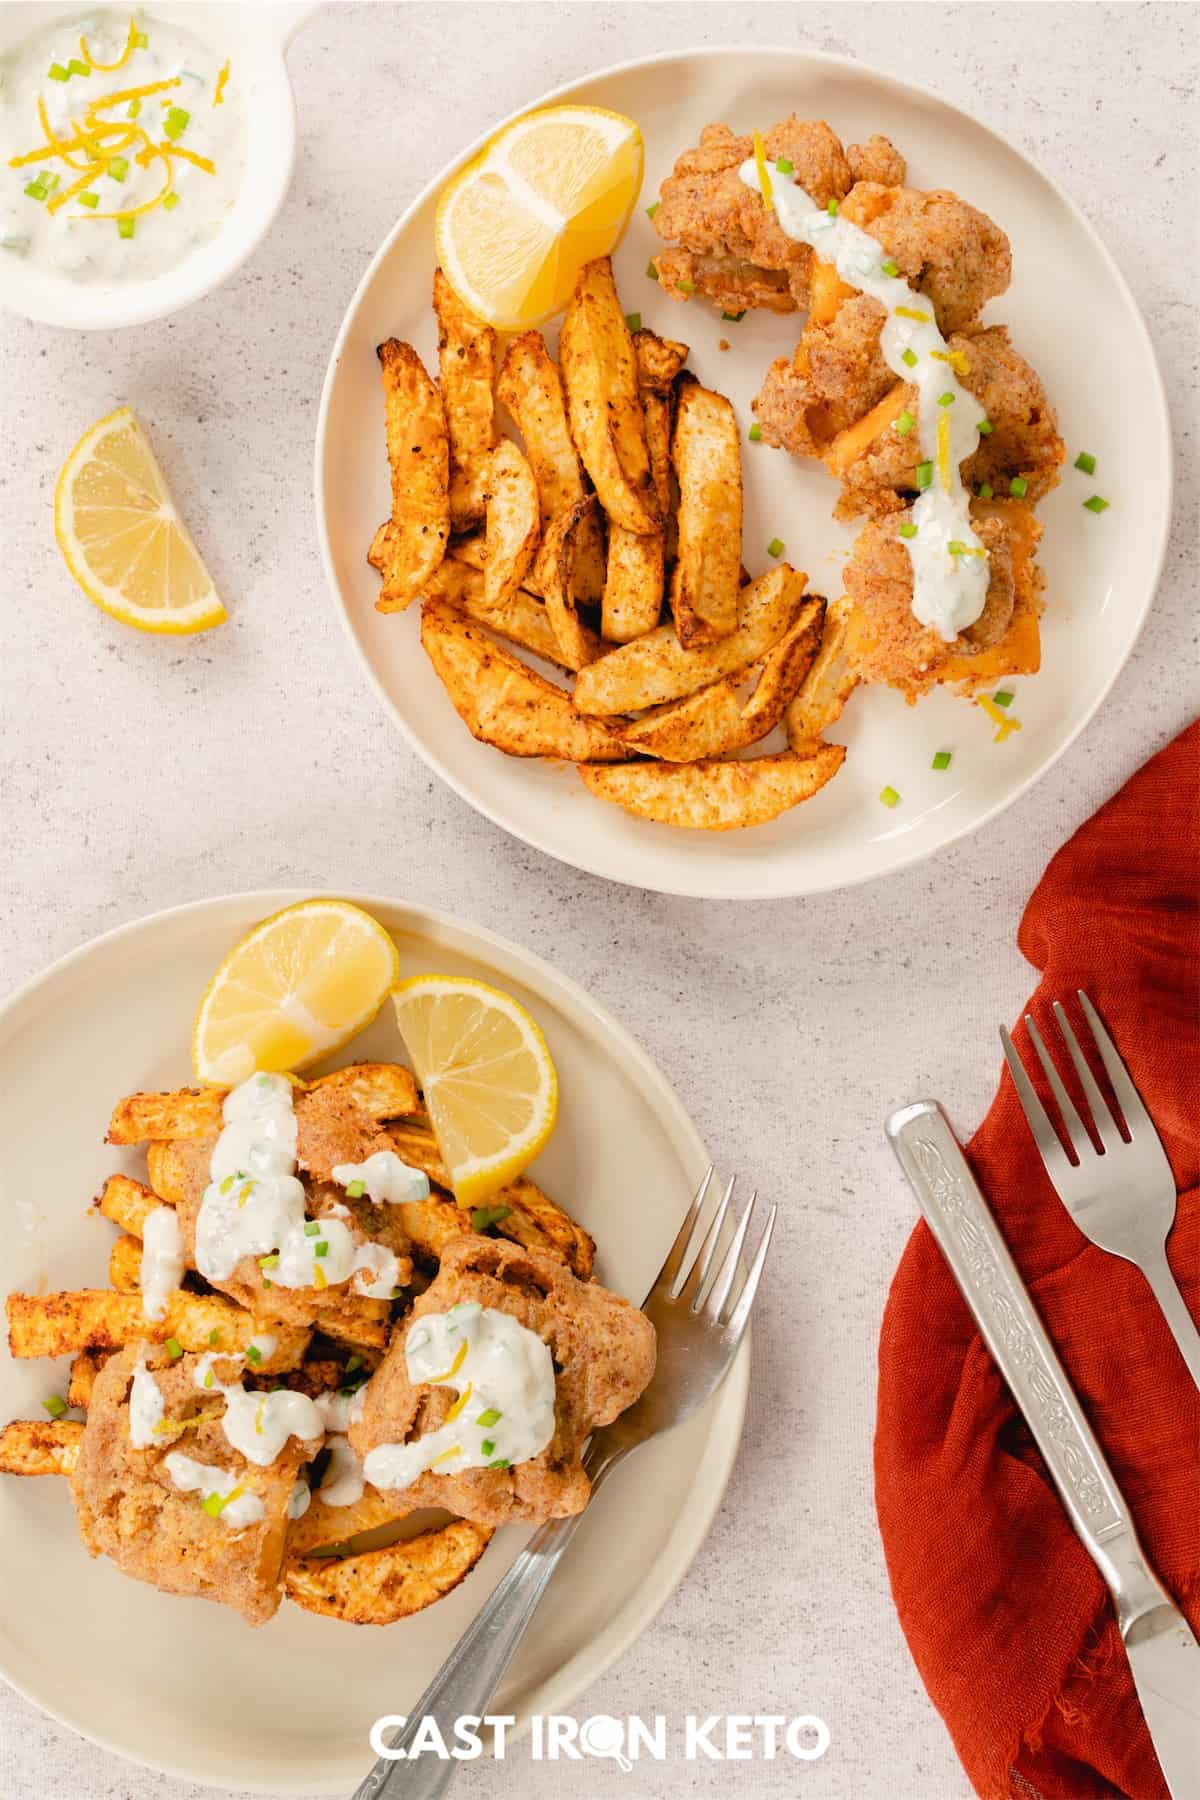 two plates of keto-friendly fish and chips on a table with a fork and knife.